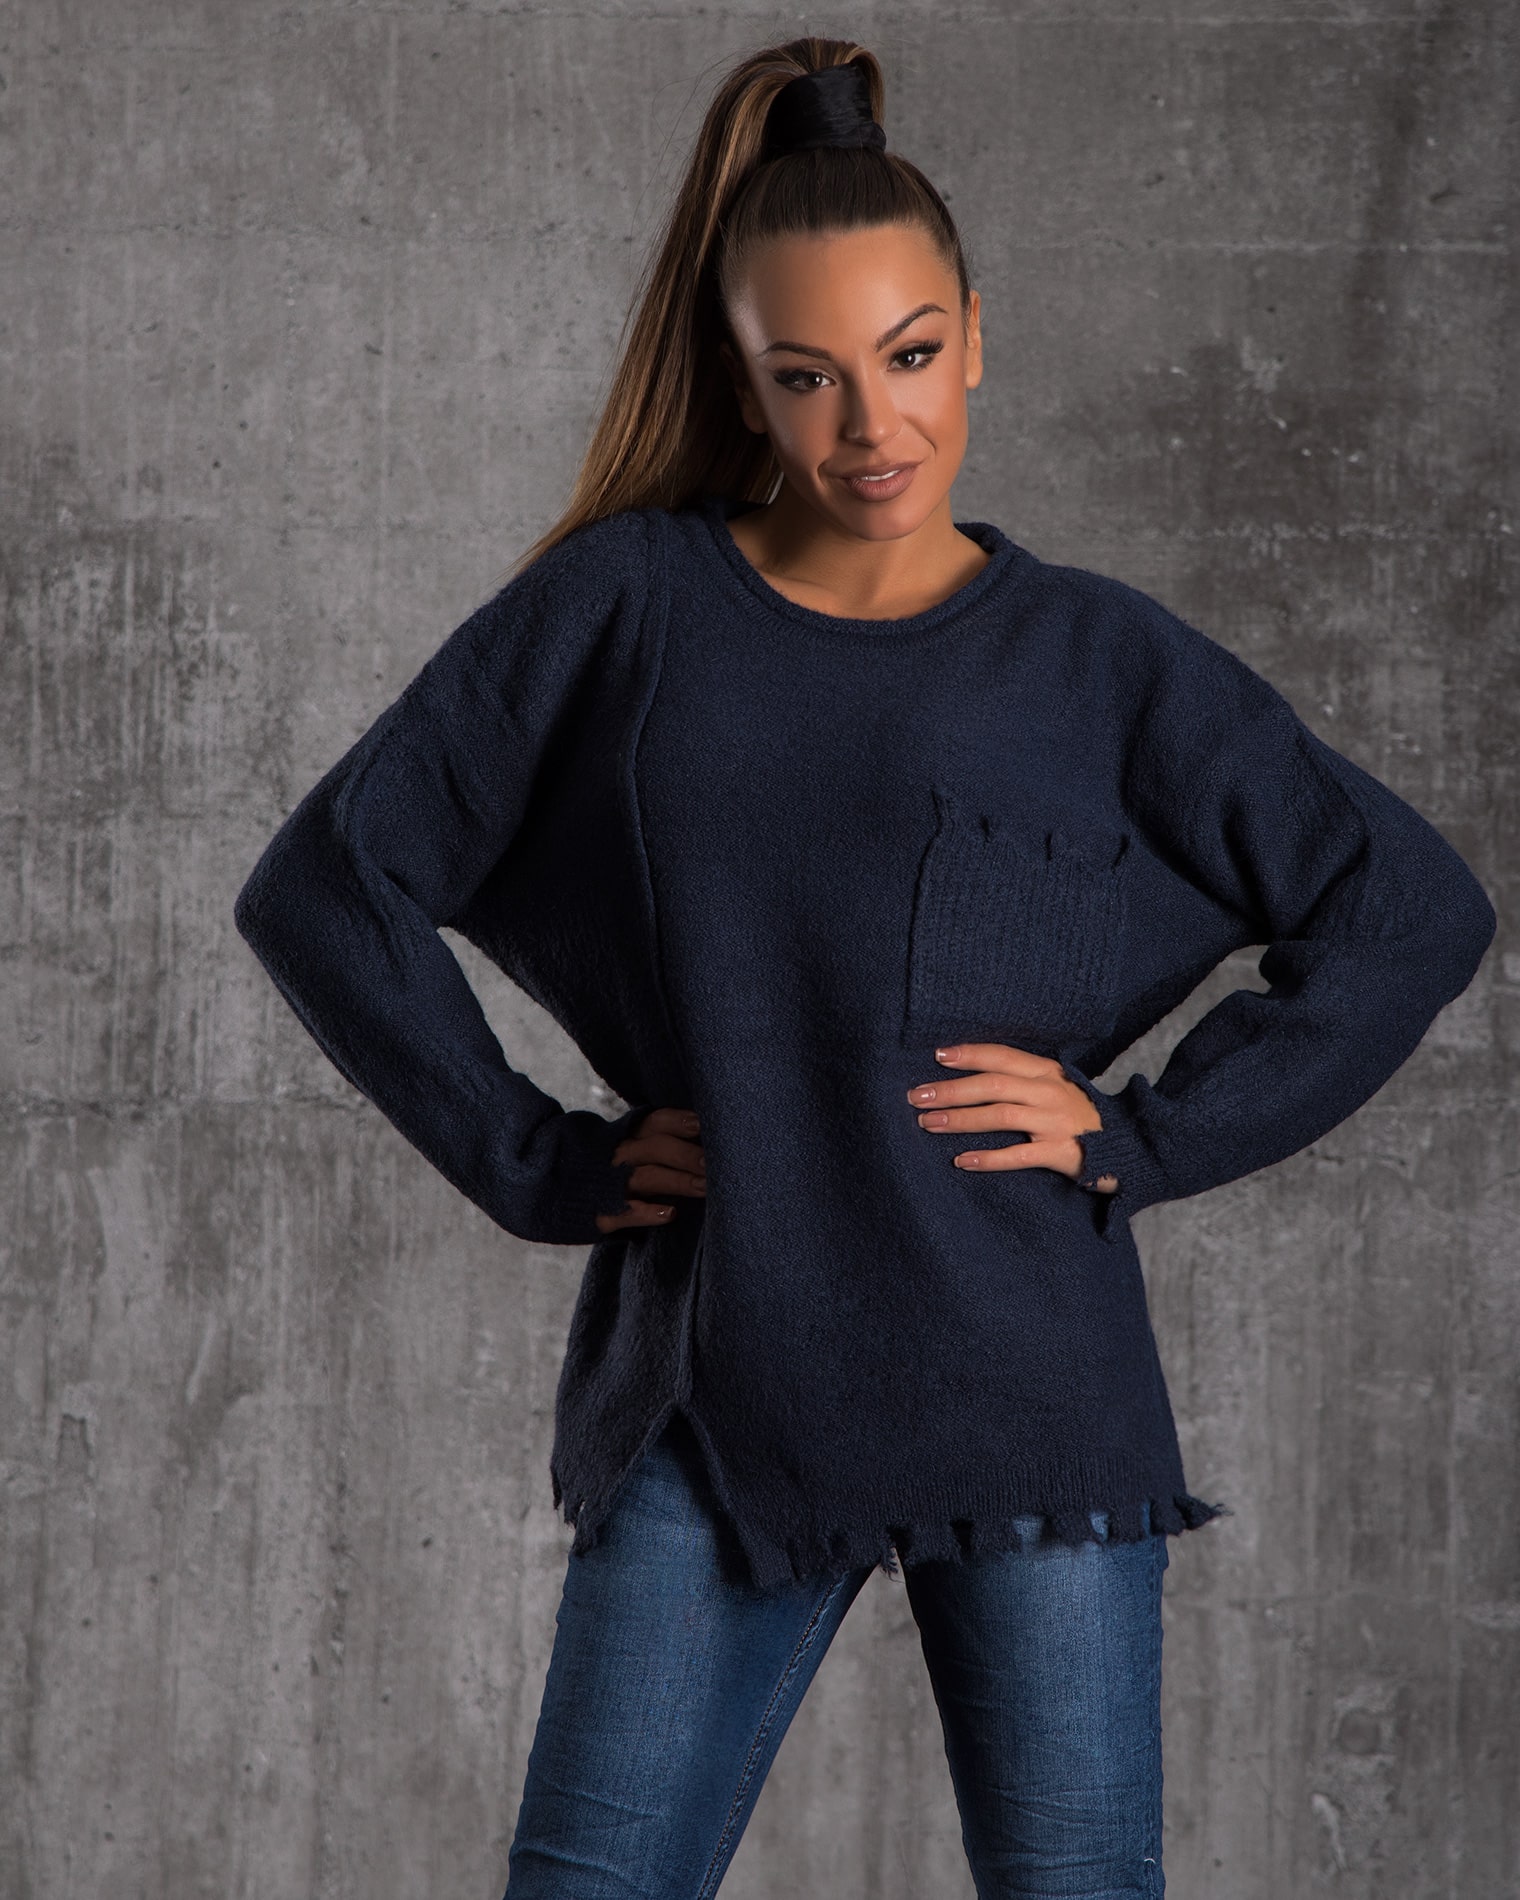 Equality Sweater With Front Pocket, Blue Color